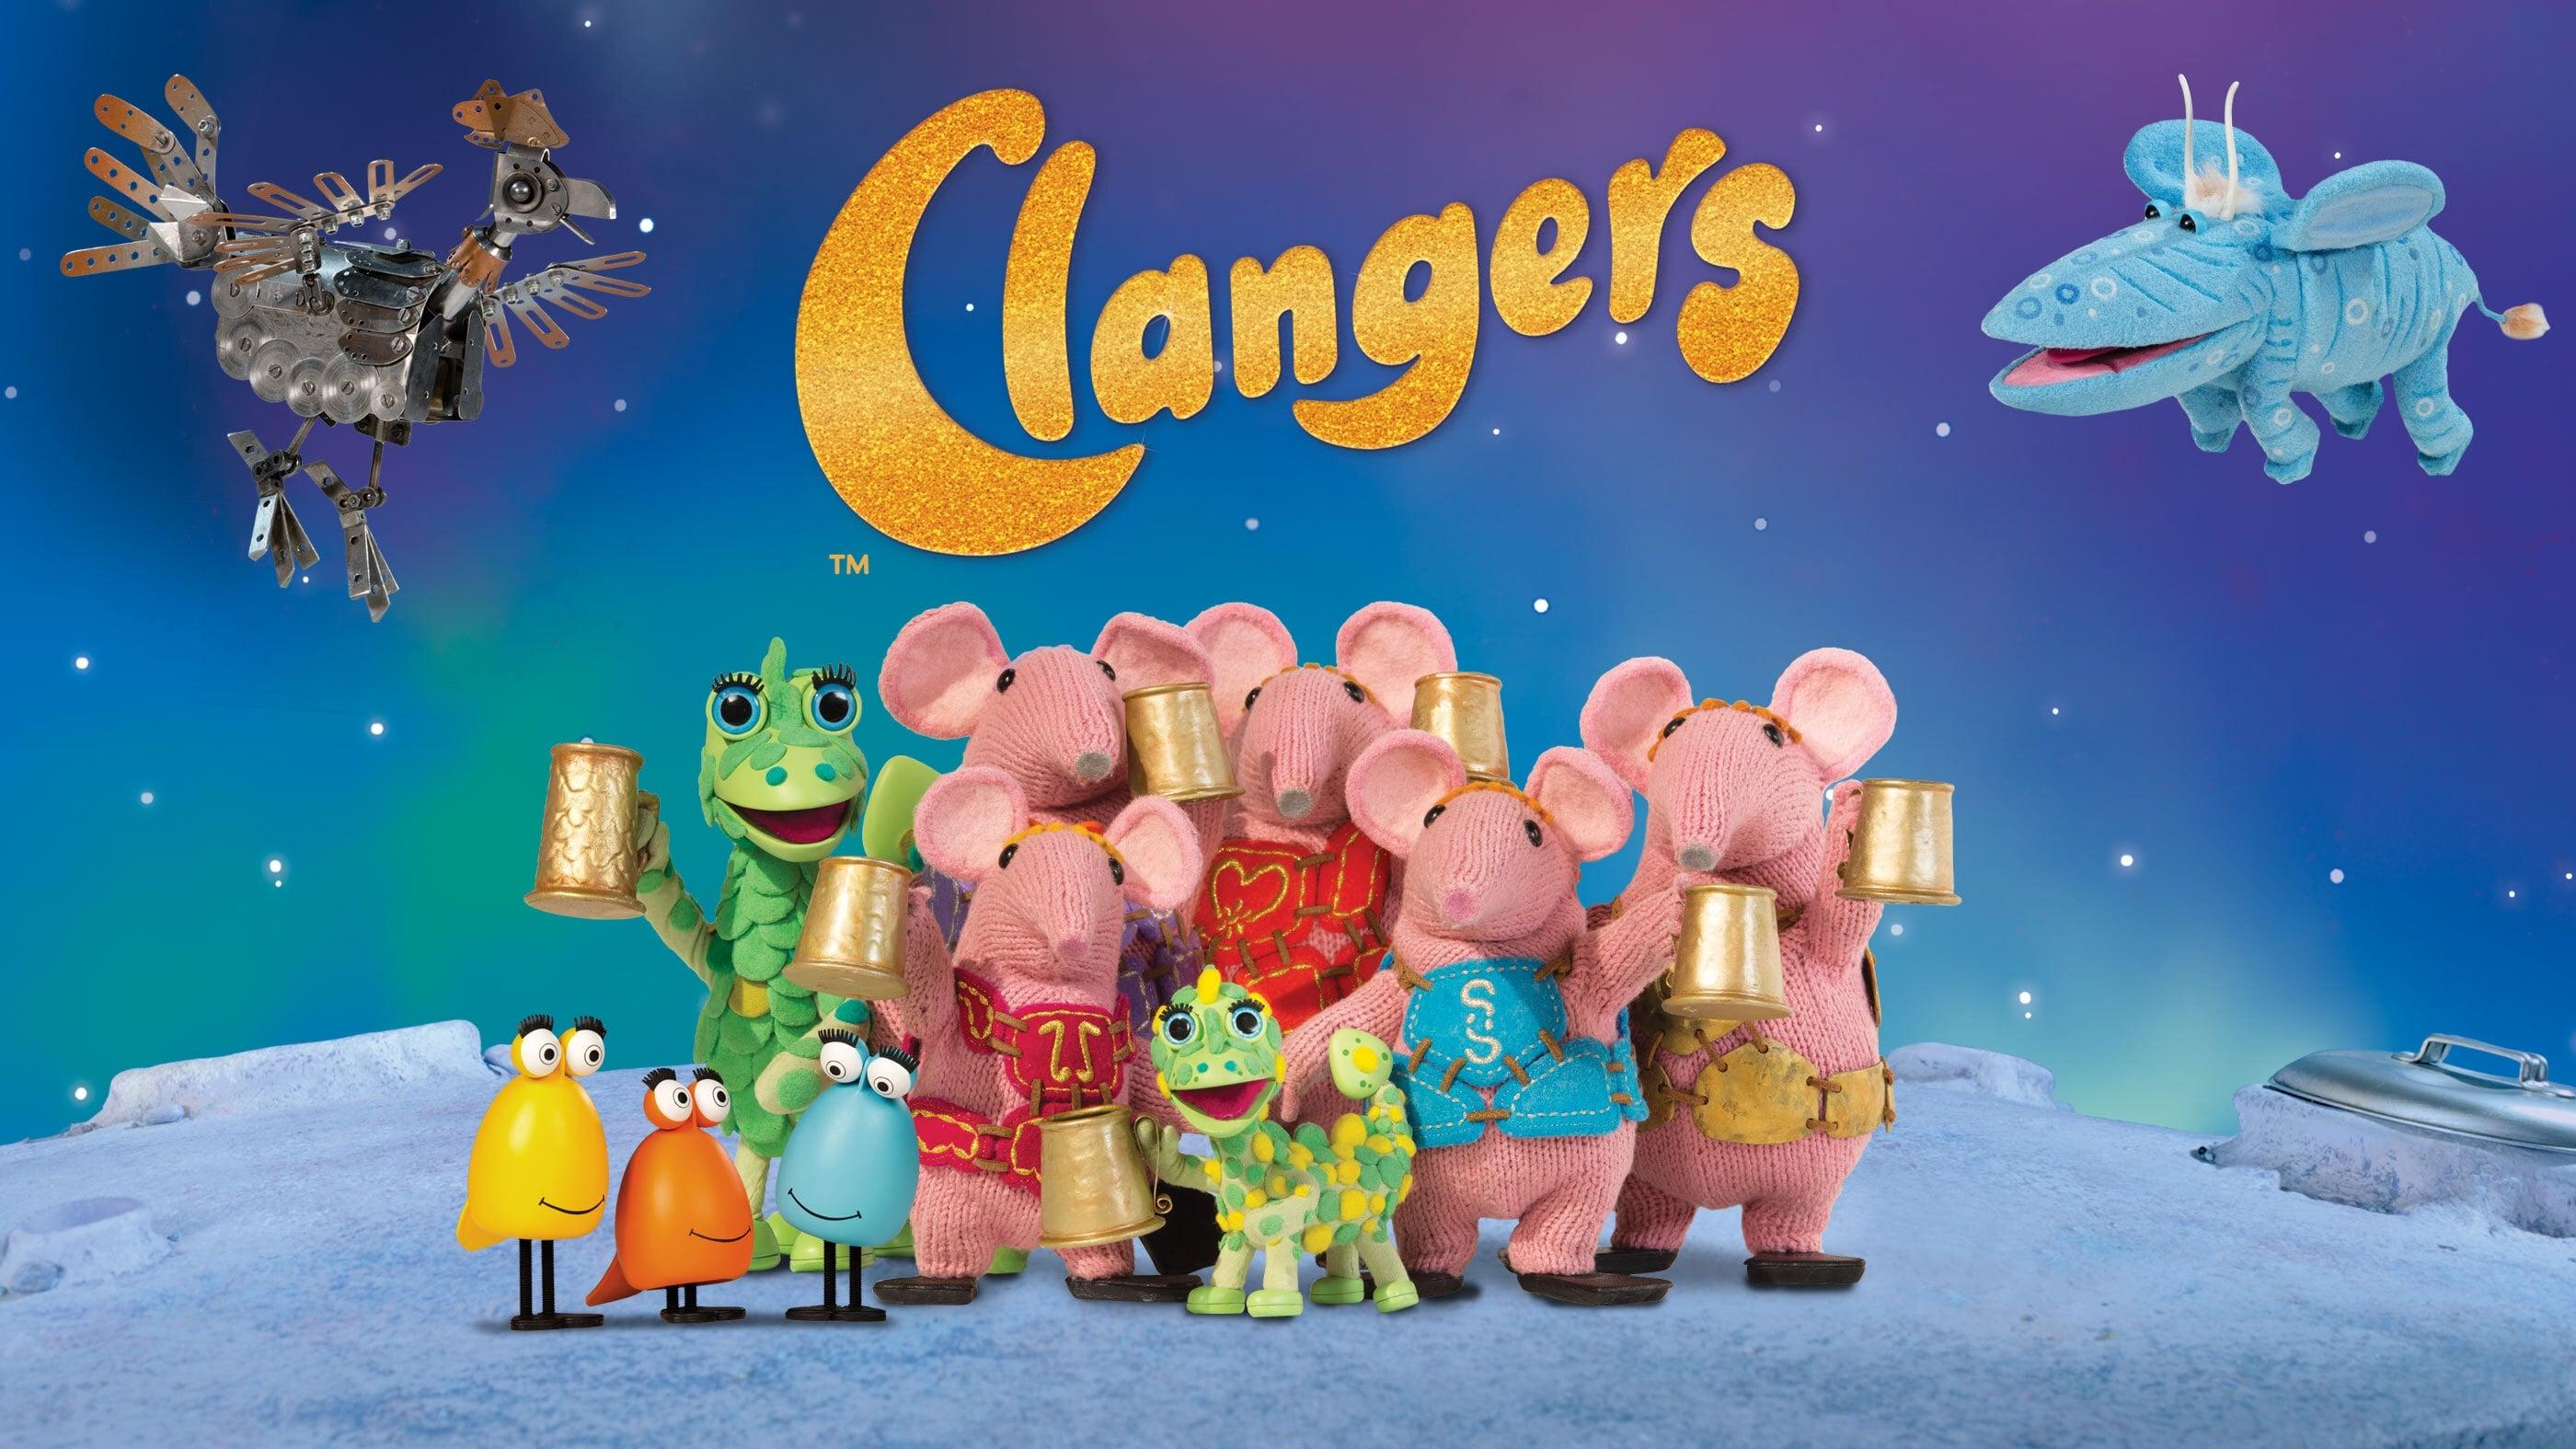 Clangers backdrop